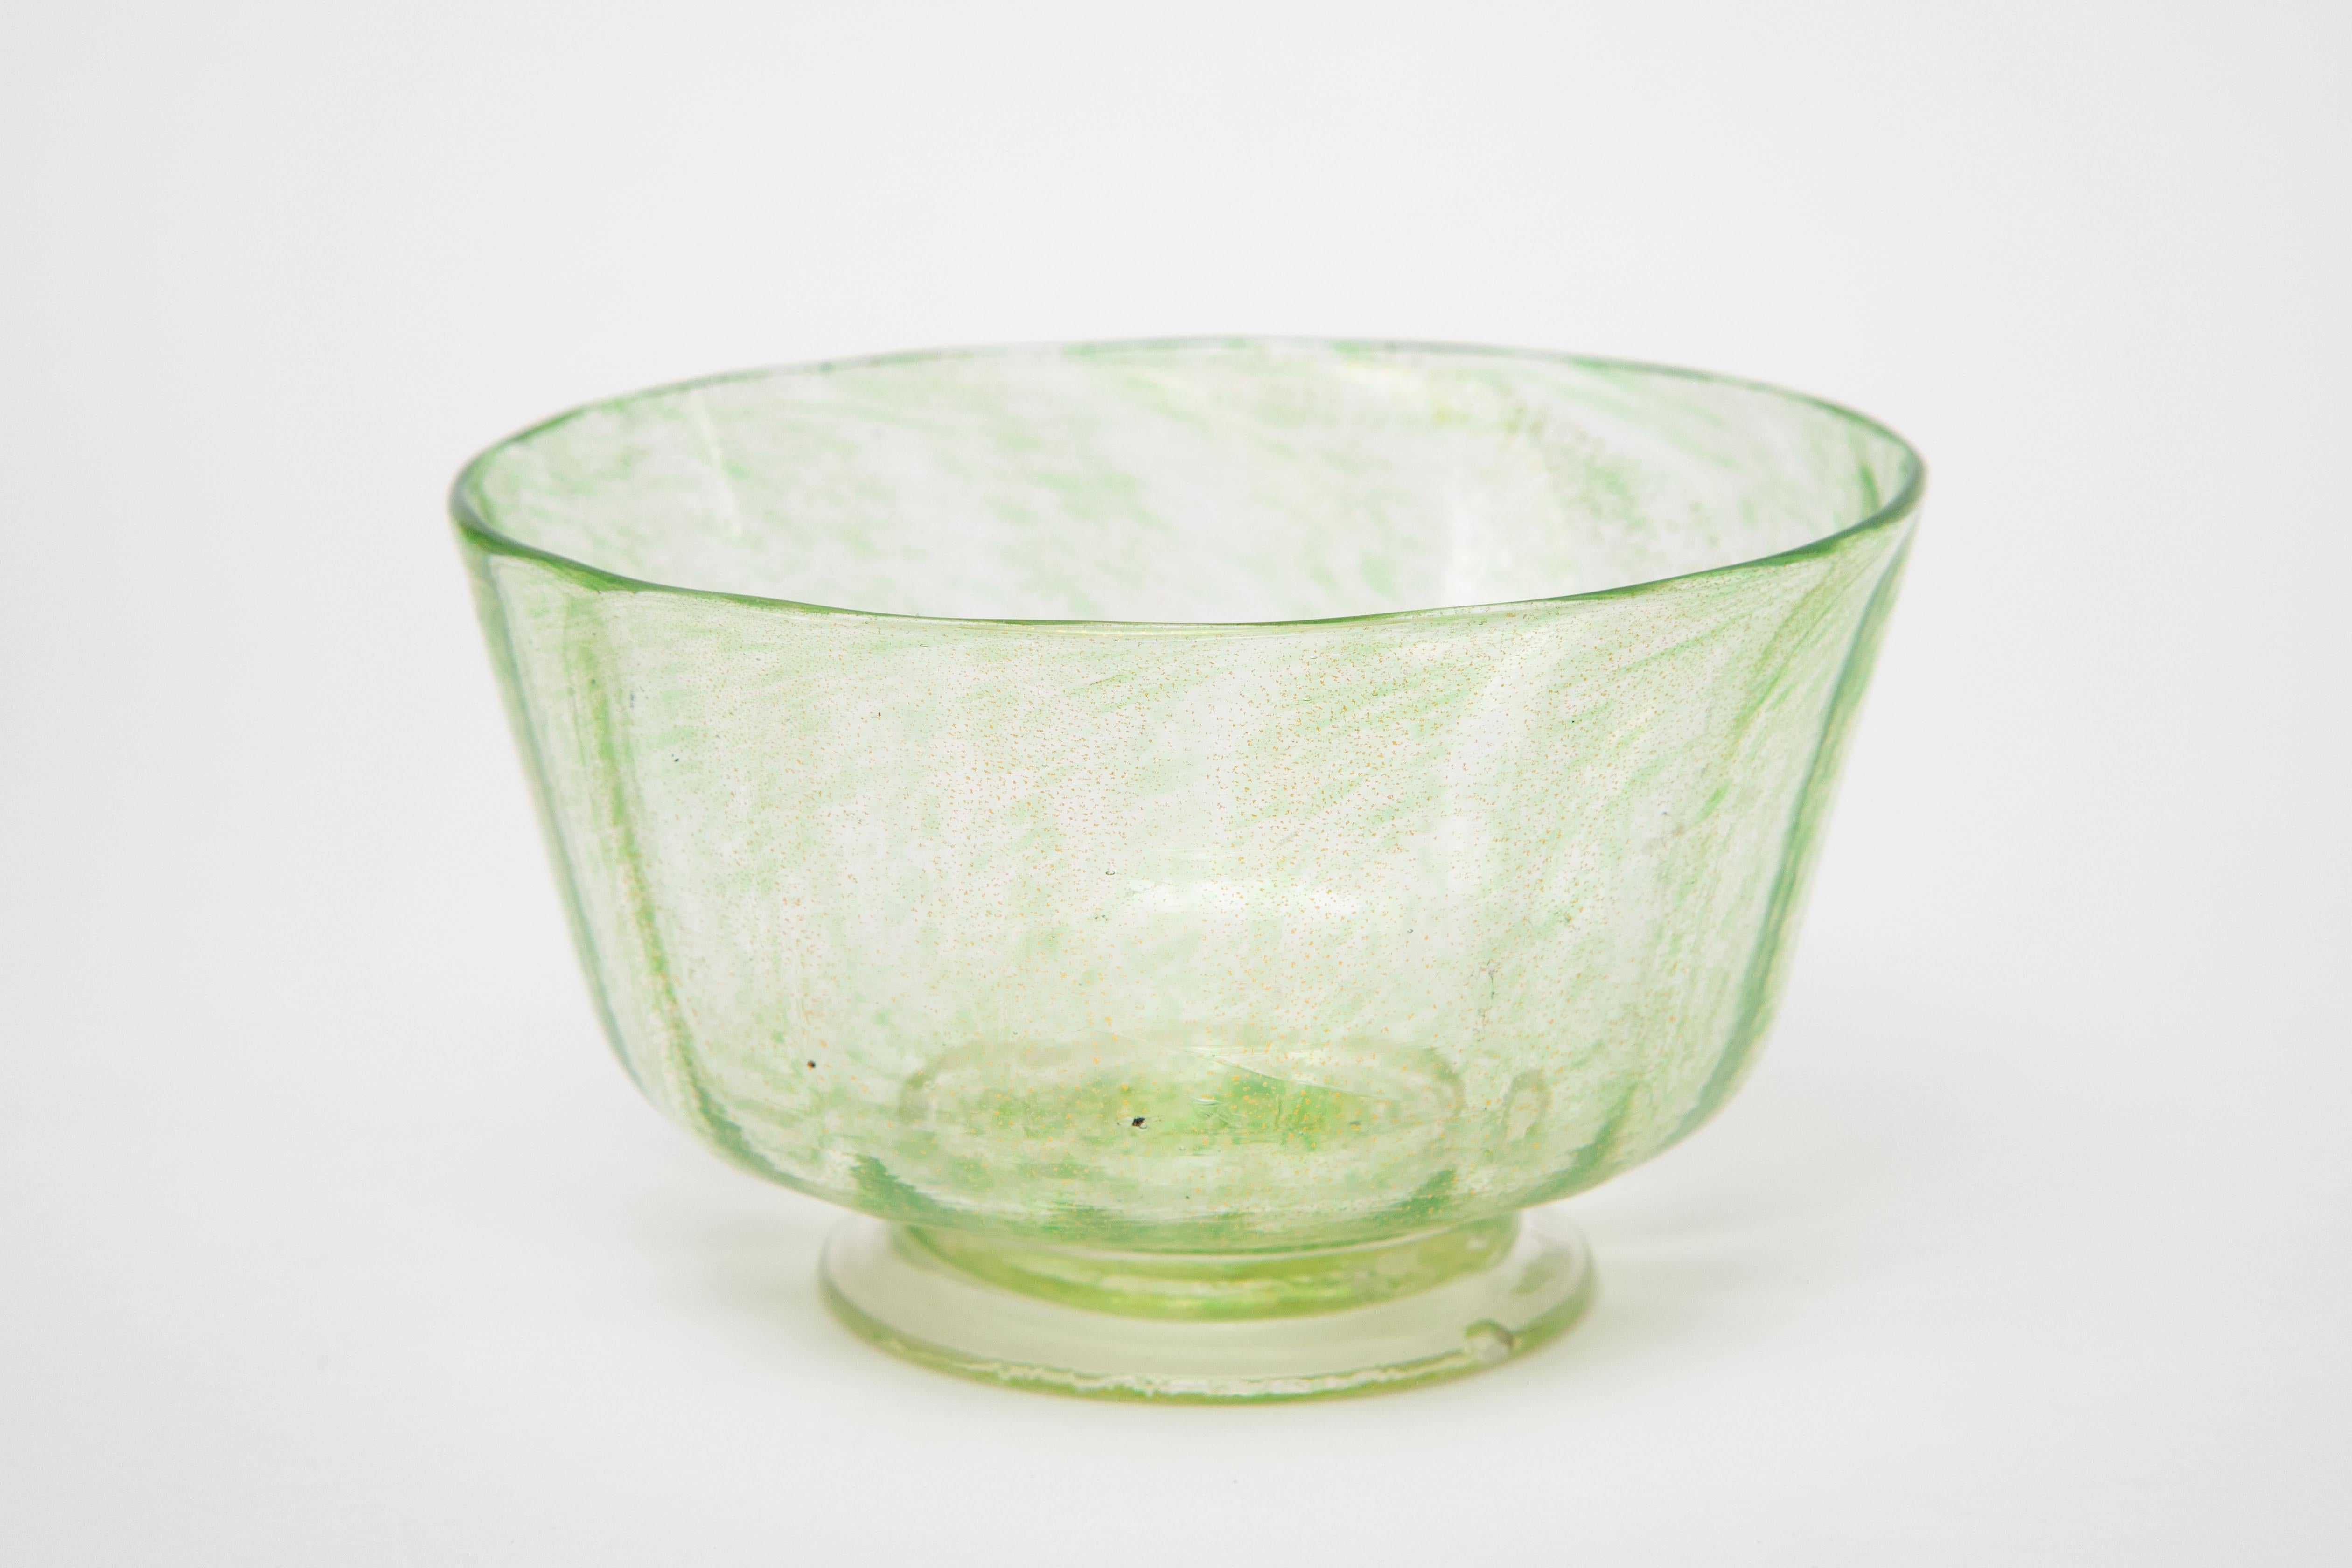 A pretty set of 12 Venetian Green Glass Bowls with 24 karat blown gold inclusion with 12 matching plates to go underneath. Classic and elegant, these pieces will mix and match in nicely with all your fine tabletop. Beautifully crafted and just the